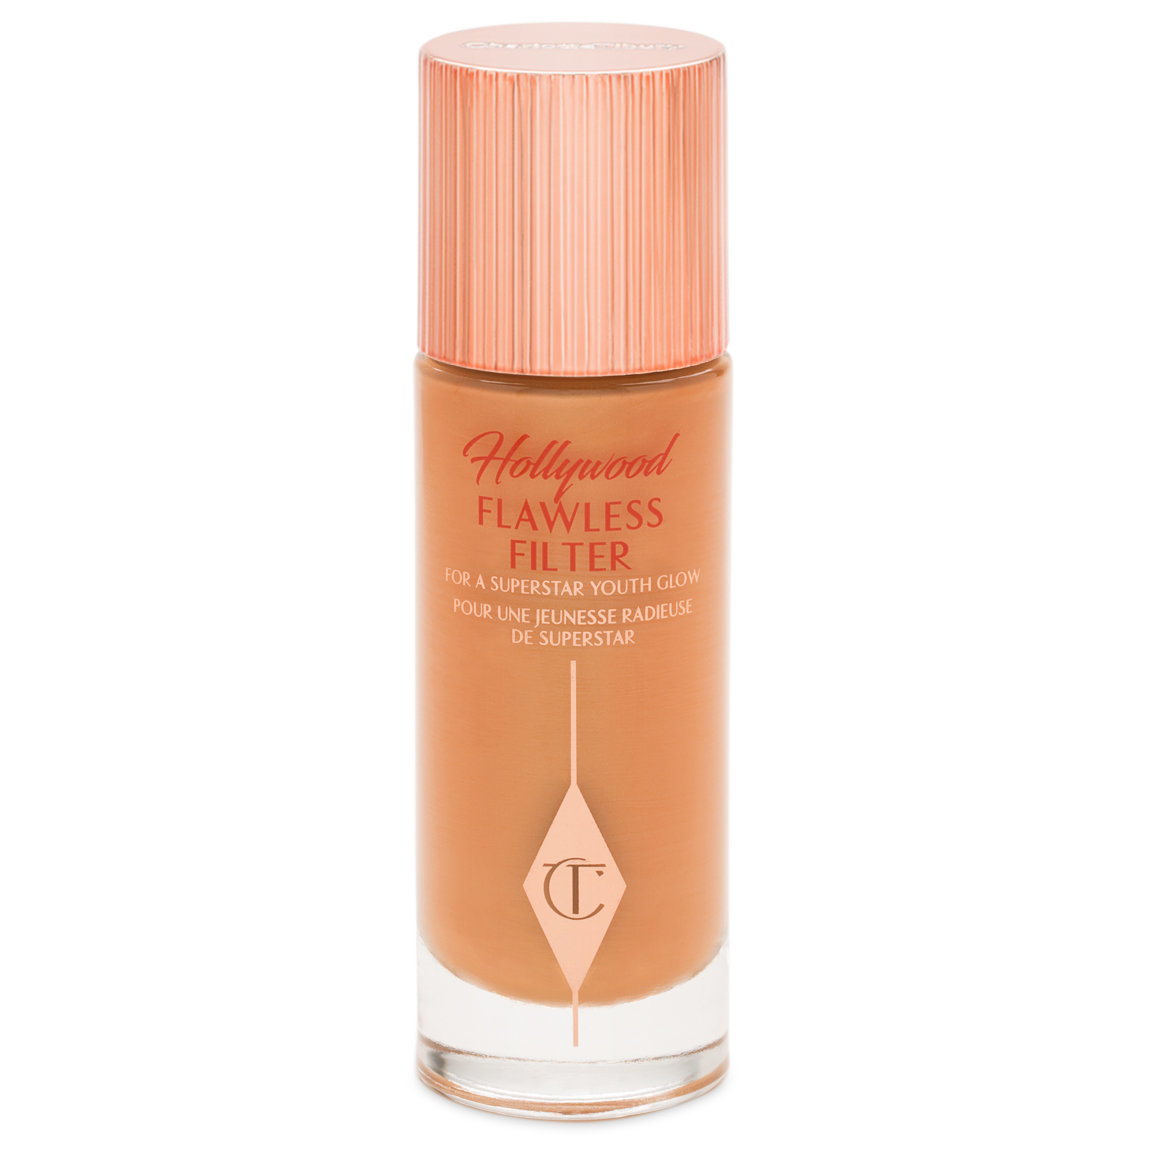 charlotte tilbury flawless filter reviews